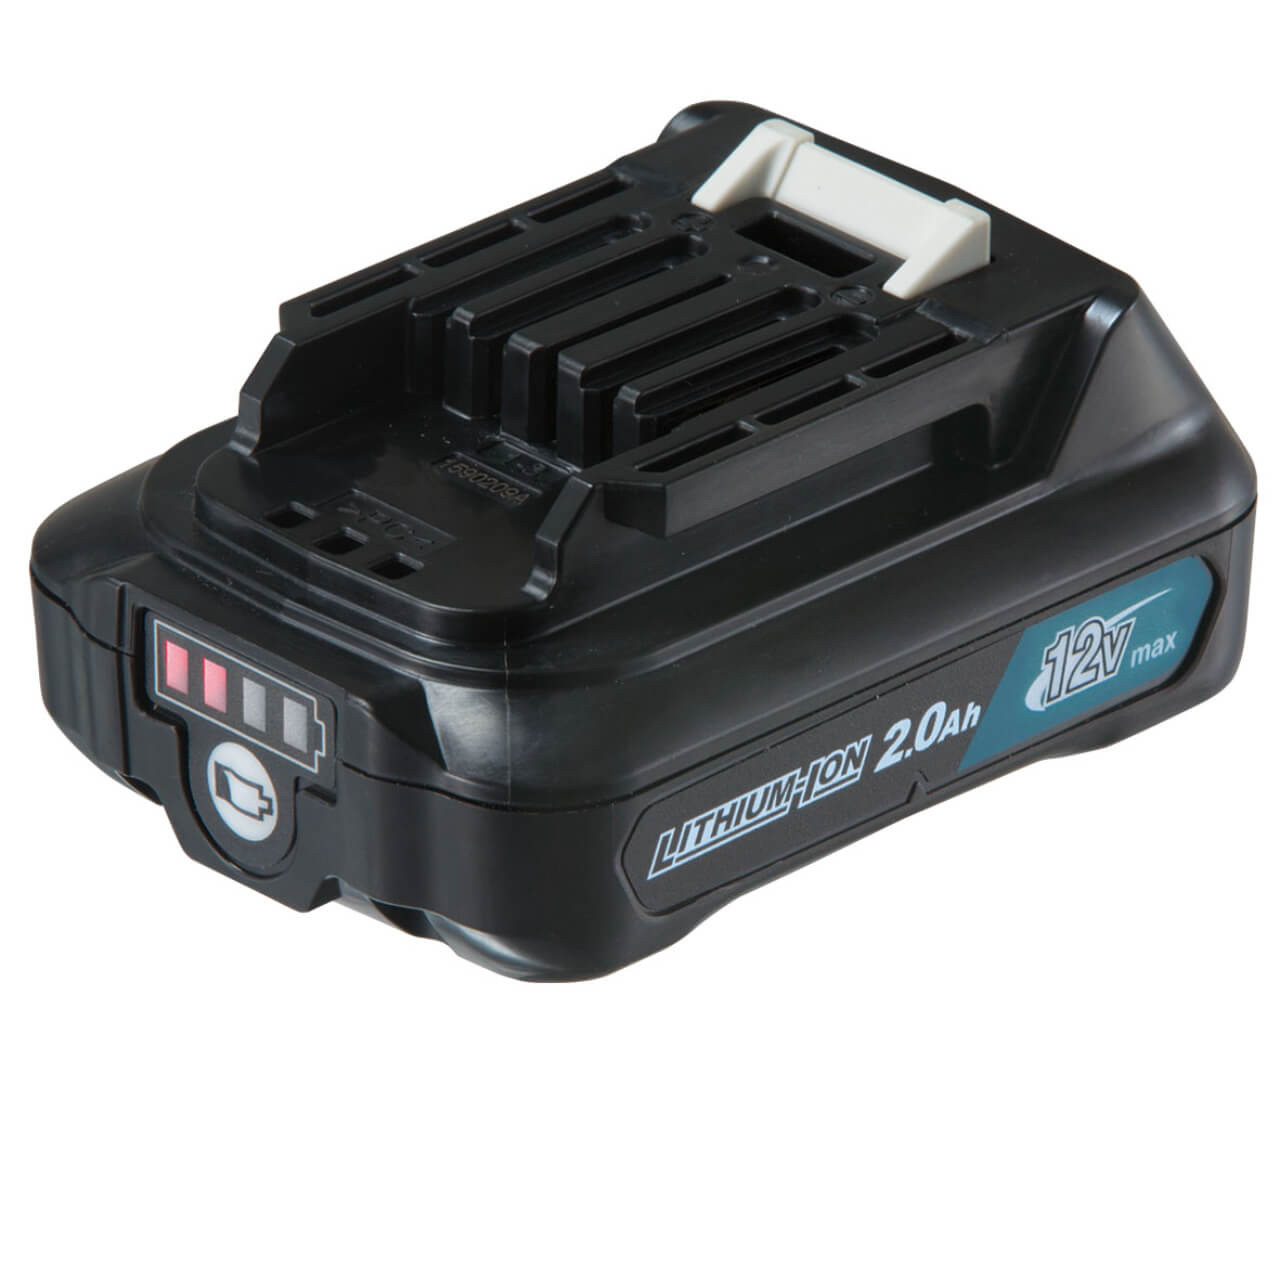 Makita 12V Max BRUSHLESS Hammer Driver Drill Kit - Includes 2 x 2.0Ah Batteries. Rapid Charger & Case